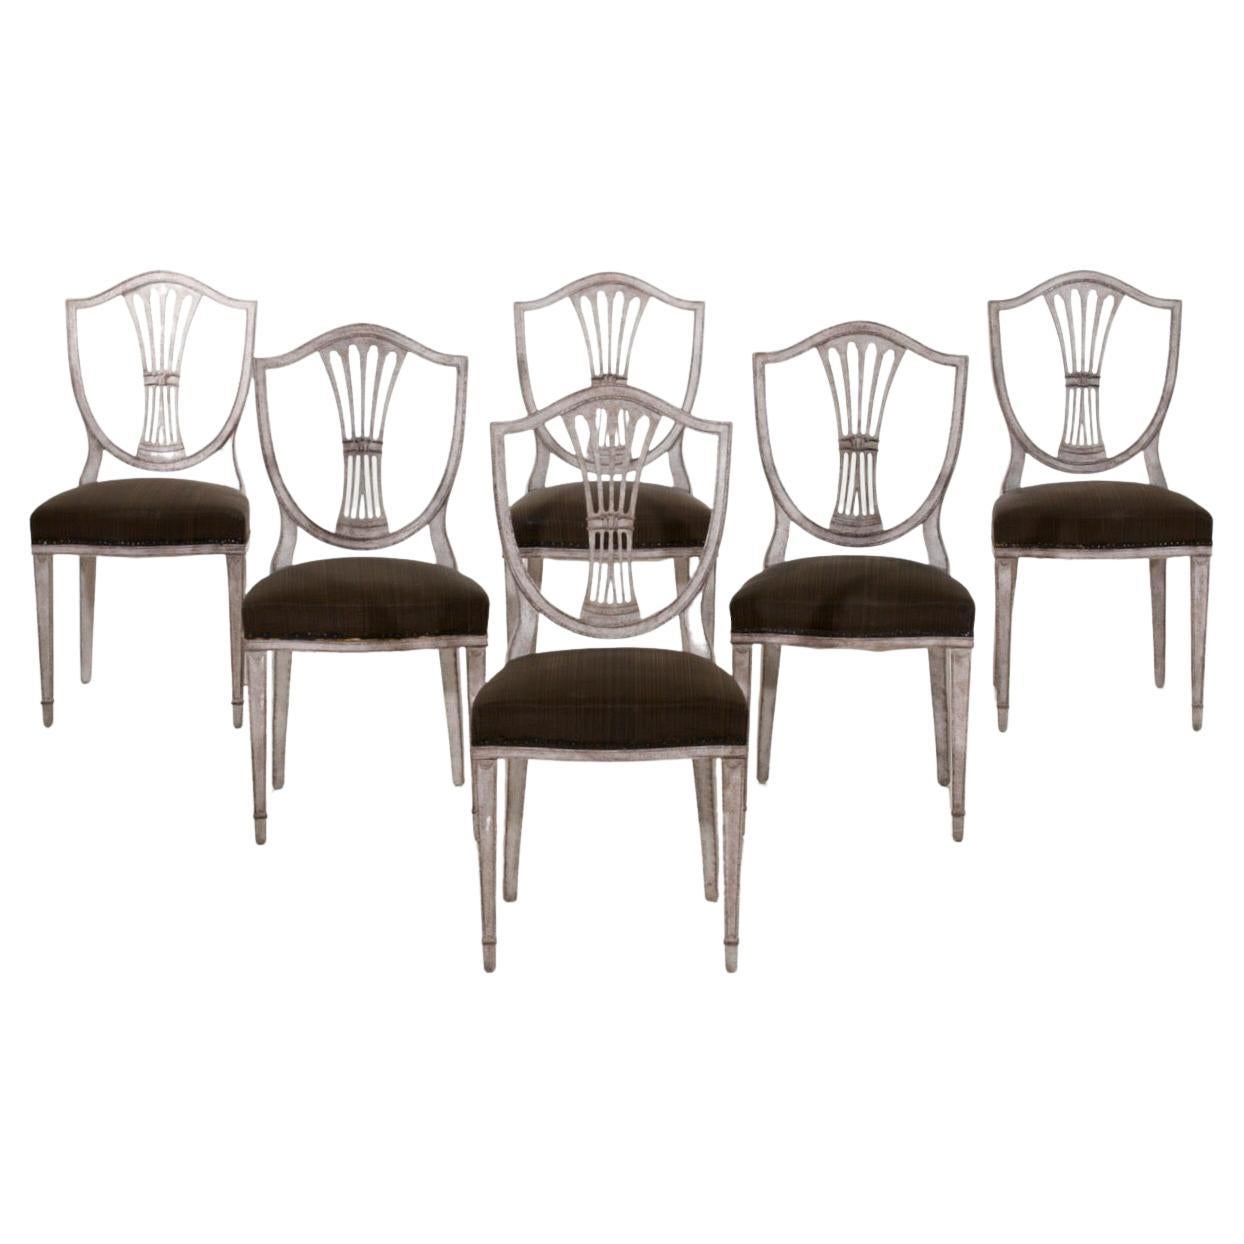 Six Gustavian Style Chairs, 20th C